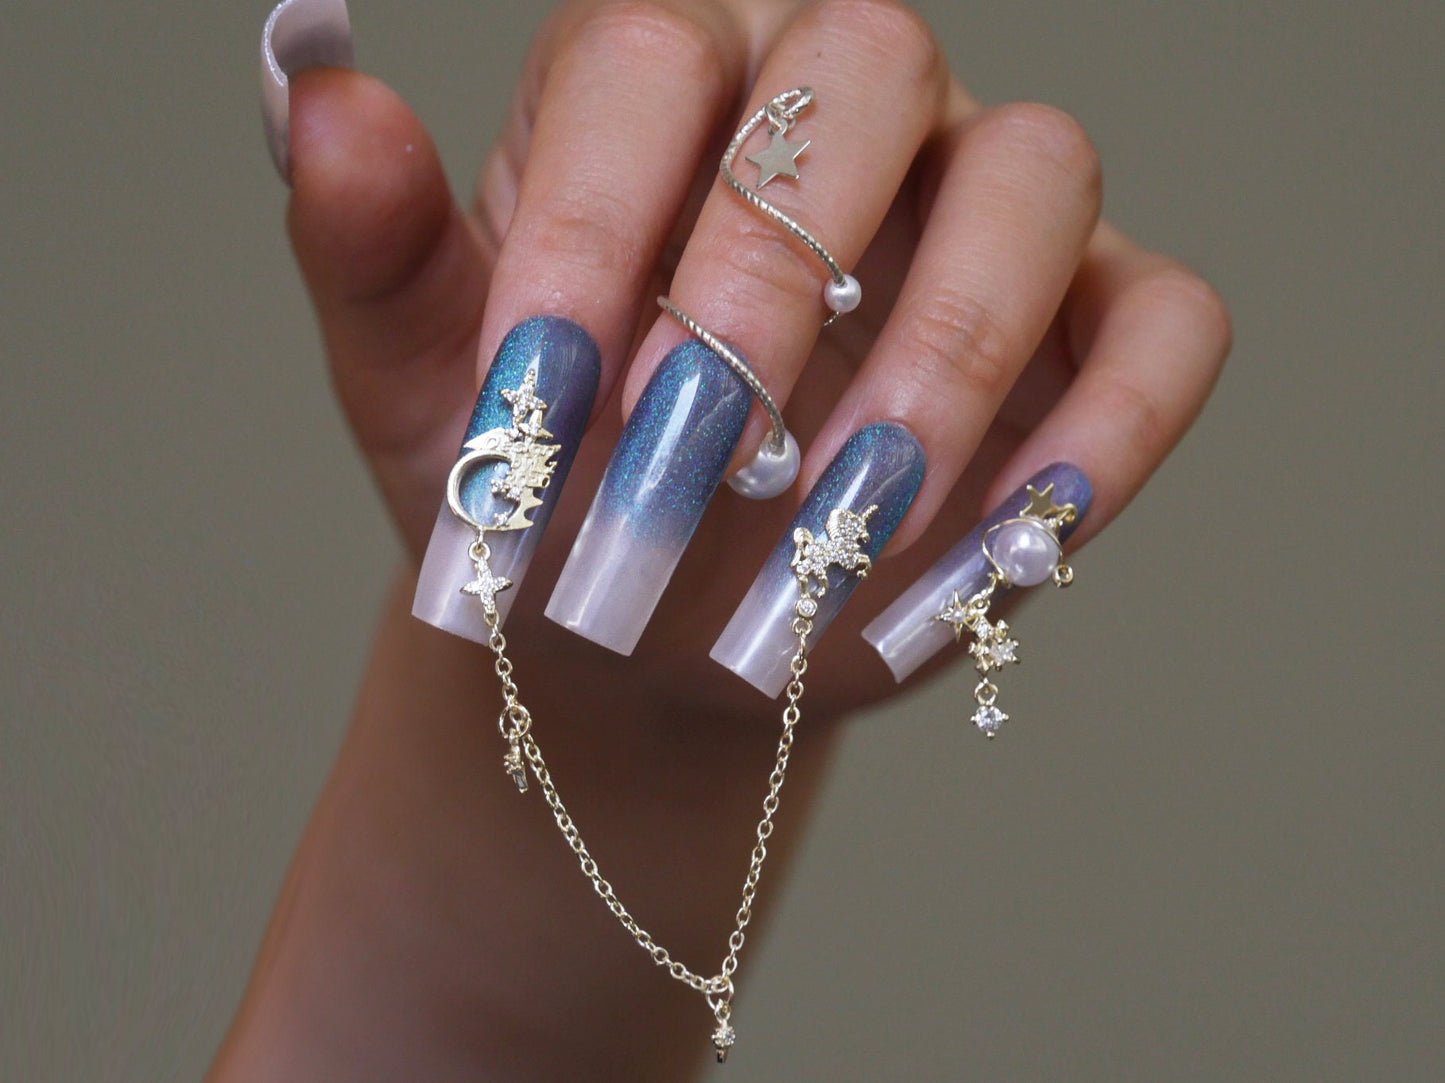 18k Gold Planetary Nail Jewelry/ Exquisite Gold Starry Sky Nail Art Decal/ Dainty 3D Unicorn Stars Planet Theme Nails Charms